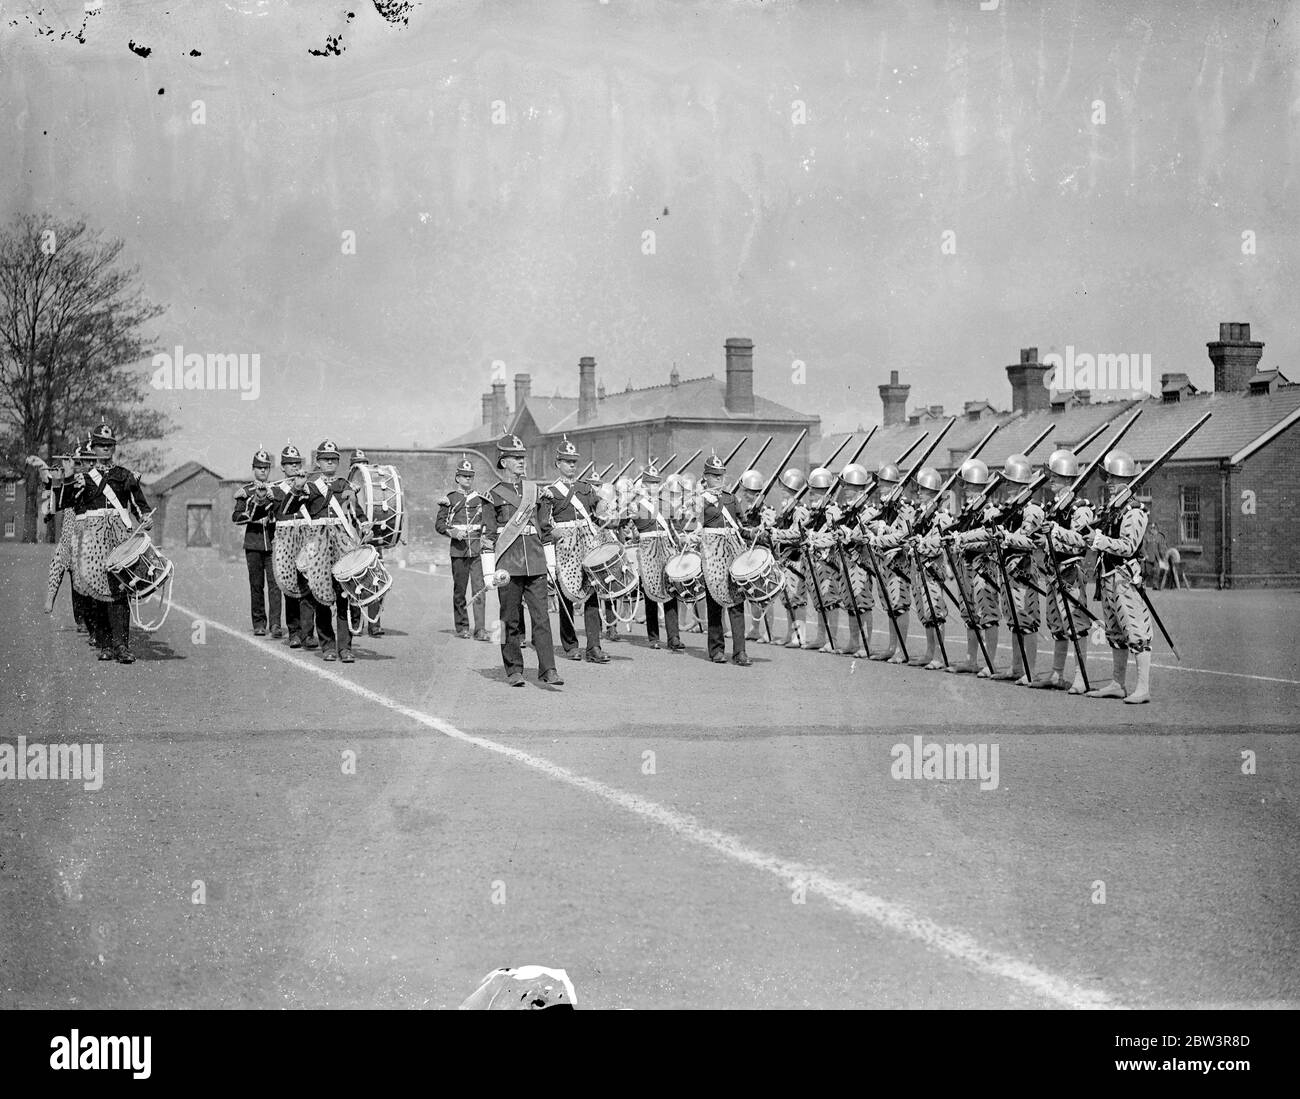 Elizabethan musketeers rehears for Royal Tournament . The 2nd Battalion , the Royal Norfolk Regiment , held a full rehearsal at Aldershot for the pageant which will be a feature of the Royal Tournament at Olympia . Photo shows , ' Musketeers ' of the Elizabethan period led by drummers . 30 April 1936 . Stock Photo